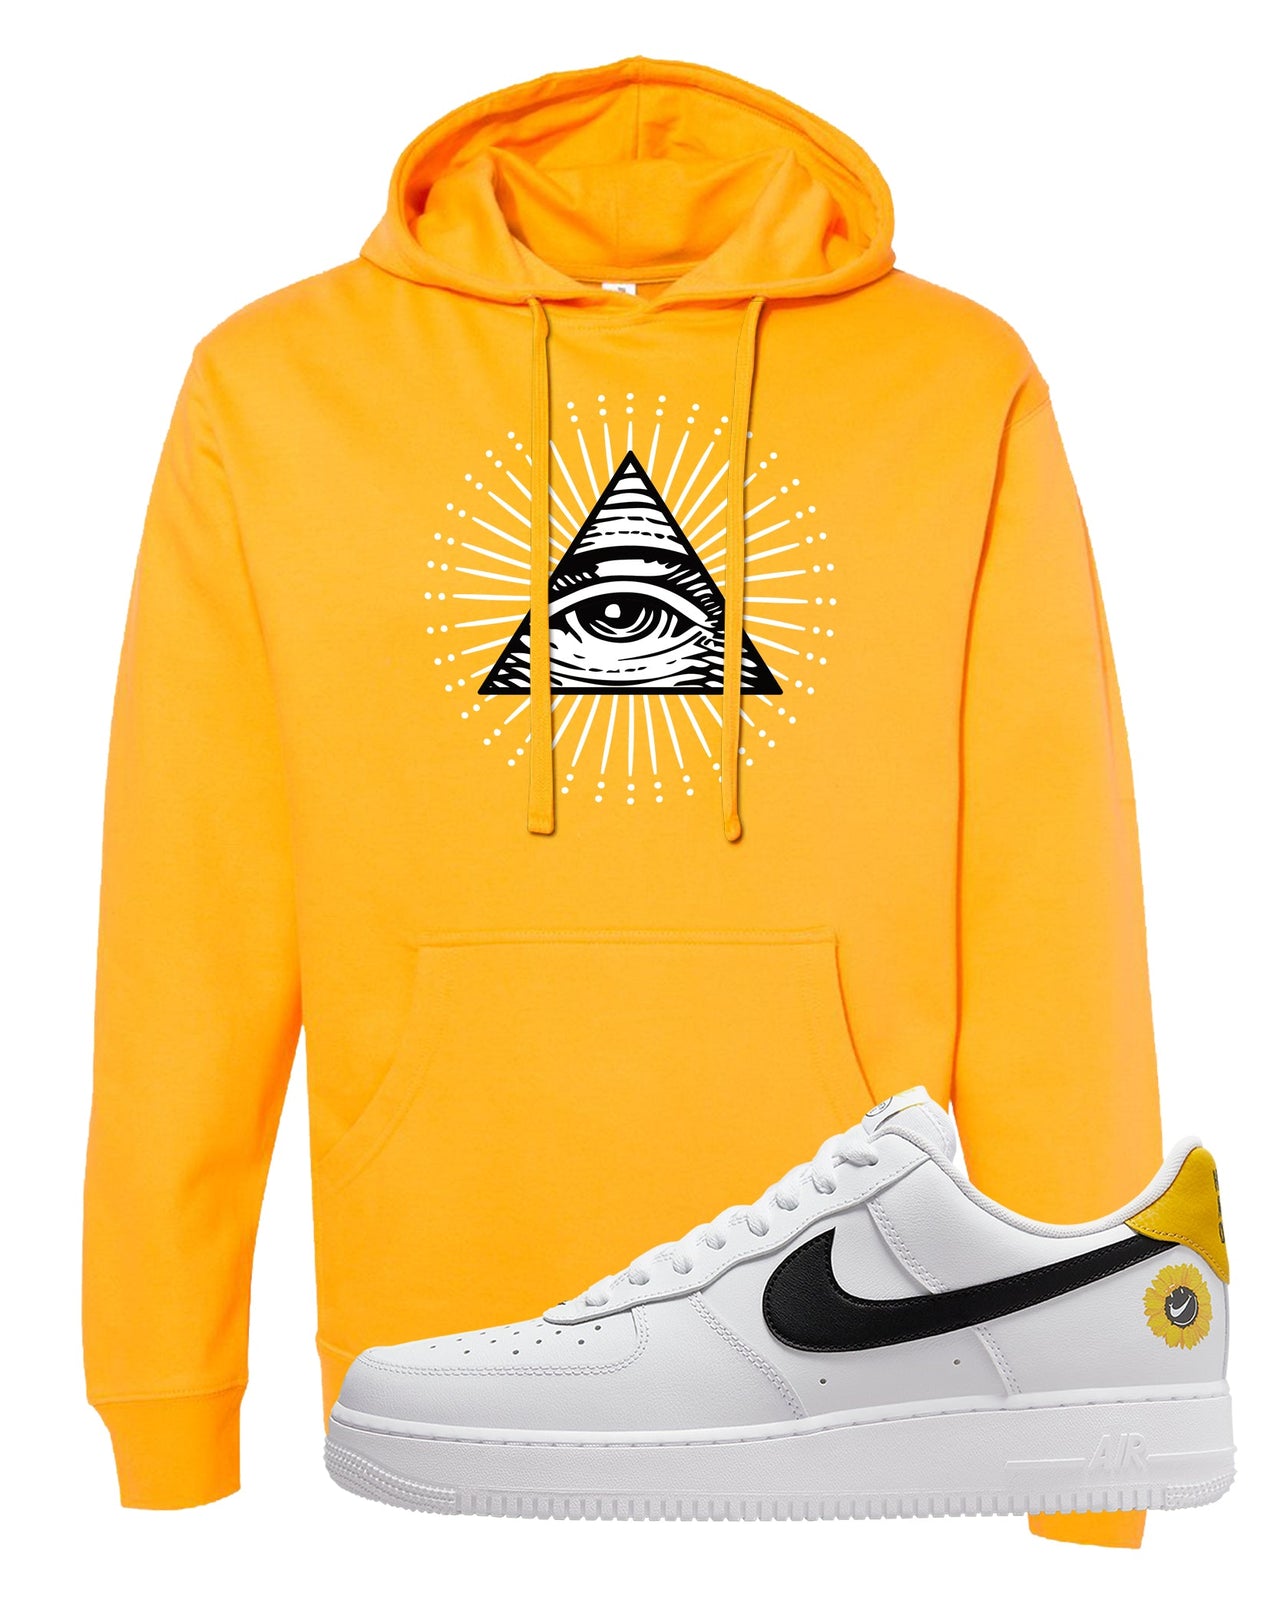 Have A Nice Day AF1s Hoodie | All Seeing Eye, Gold